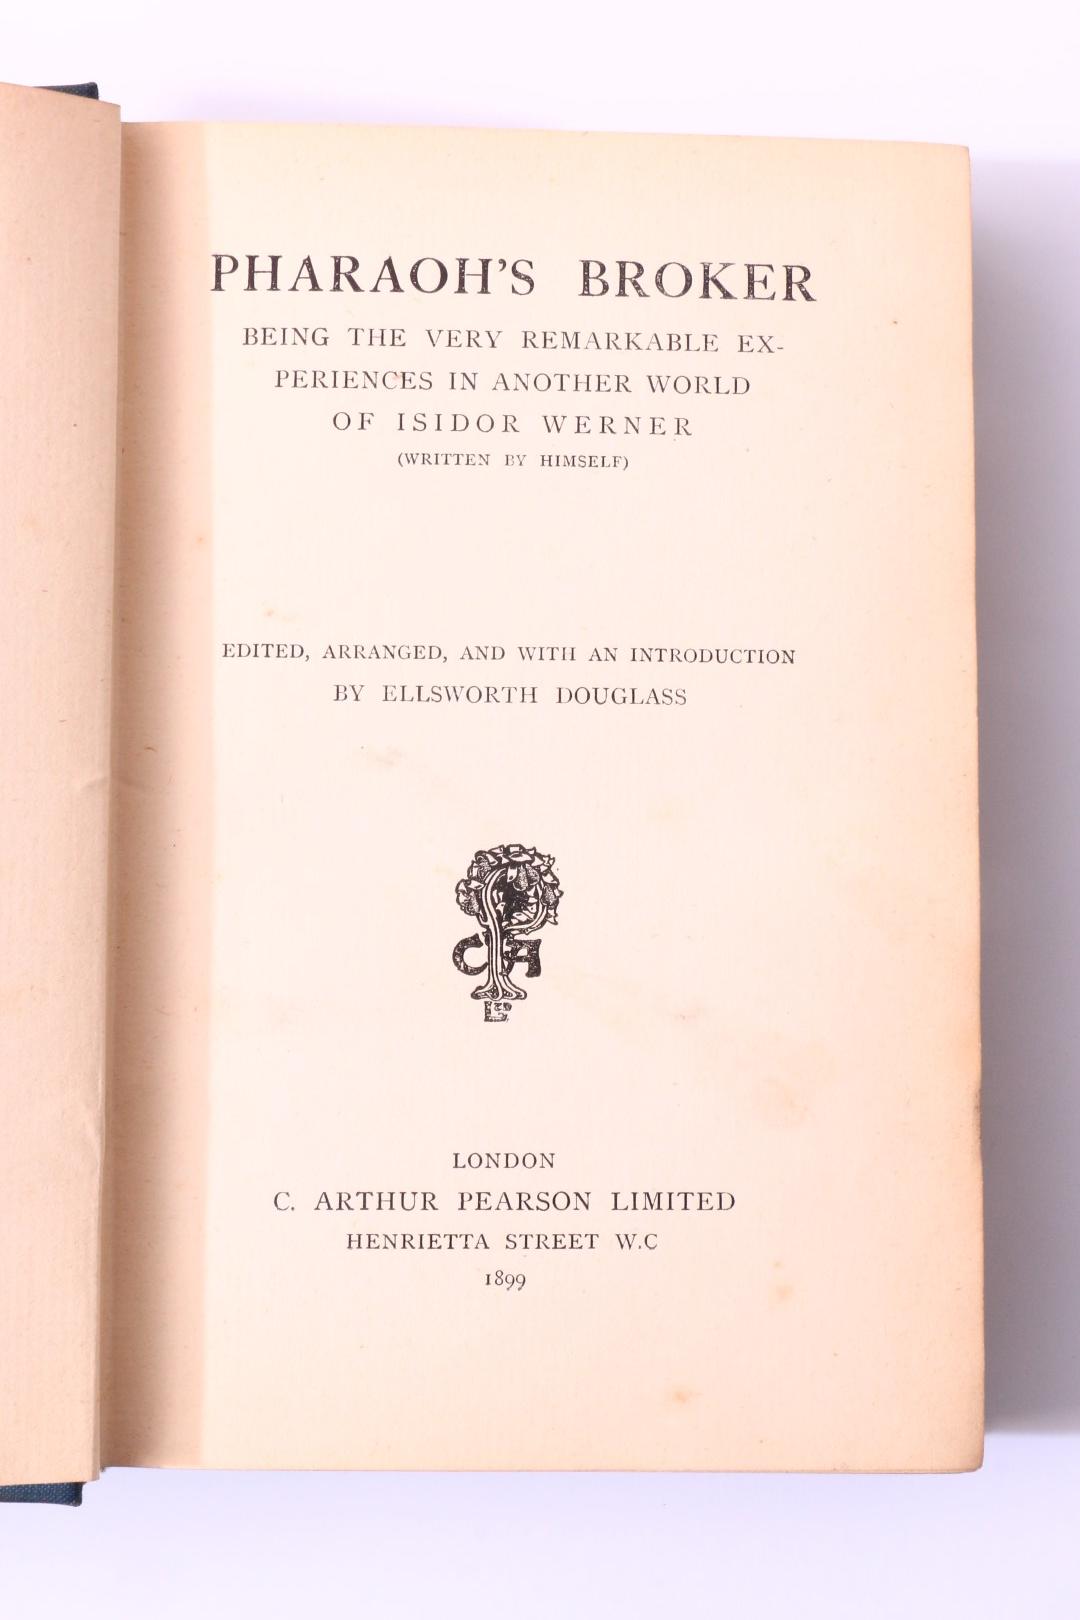 Ellsworth Douglass - Pharaoh's Broker. Being the very remarkable experiences in another world of Isidor Werner - Arthur Pearson, 1899, First Edition.